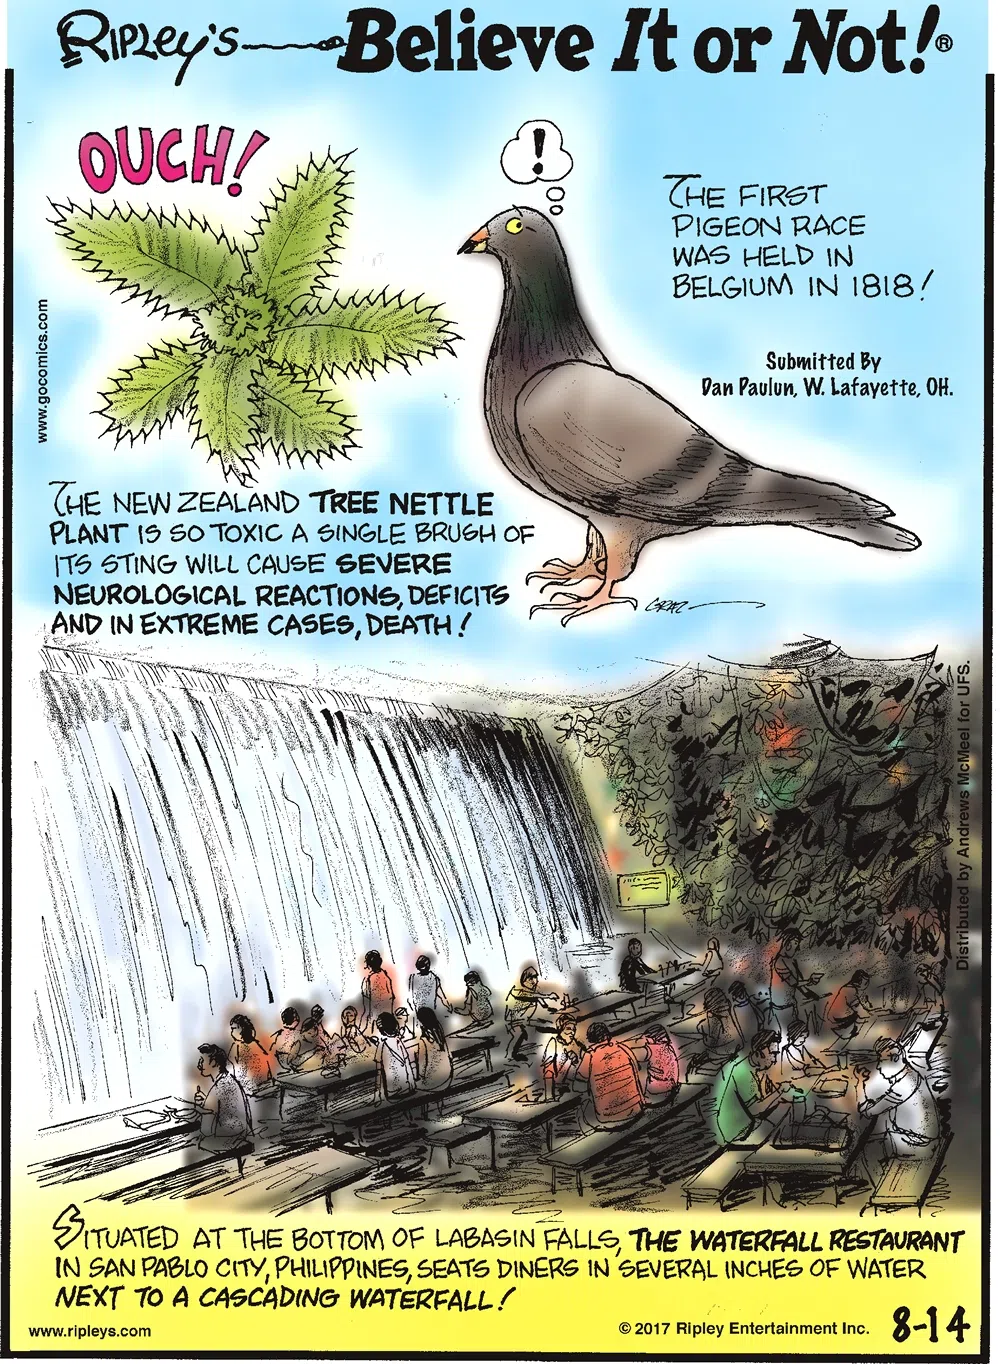 The New Zealand Tree Nettle Plant is so toxic a single brush of its sting will cause severe neurological reactions, deficits and in extreme cases, death!-------------------- The first pigeon race was held in Belgium in 1818! Submitted by Dan Paulun, W. Lafayette, OH.-------------------- Situated at the bottom of Labasin Falls, The Waterfall Restaurant in San Pablo City, Philippines, seats diners in several inches of water next to a cascading waterfall!